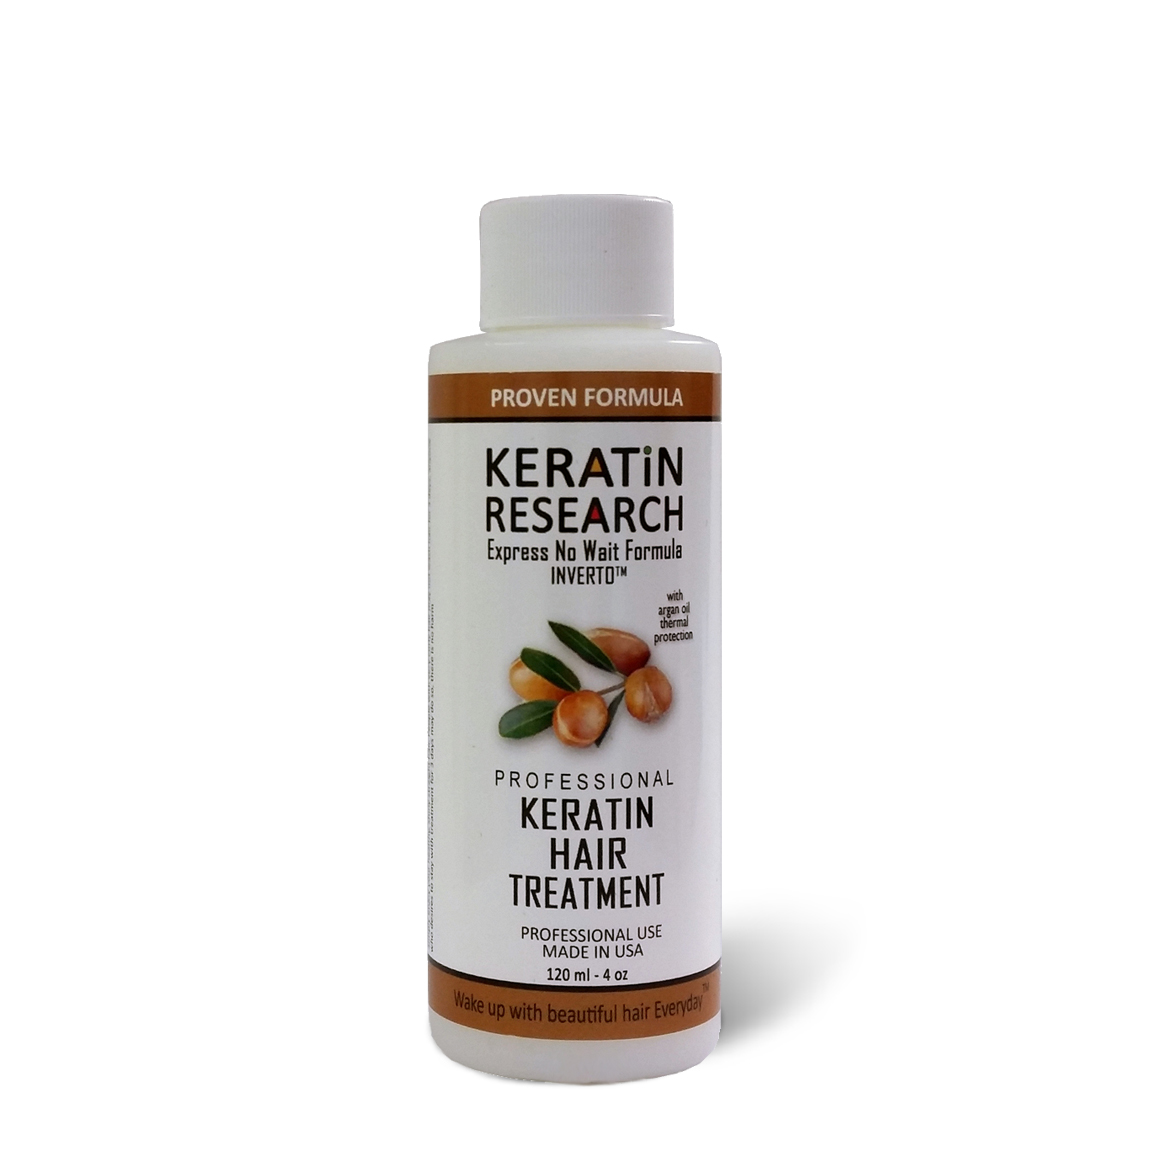 Complex Brazilian Keratin Hair Blowout Treatment 120ml Professional results Starightern and Smooths Hair - image 1 of 7